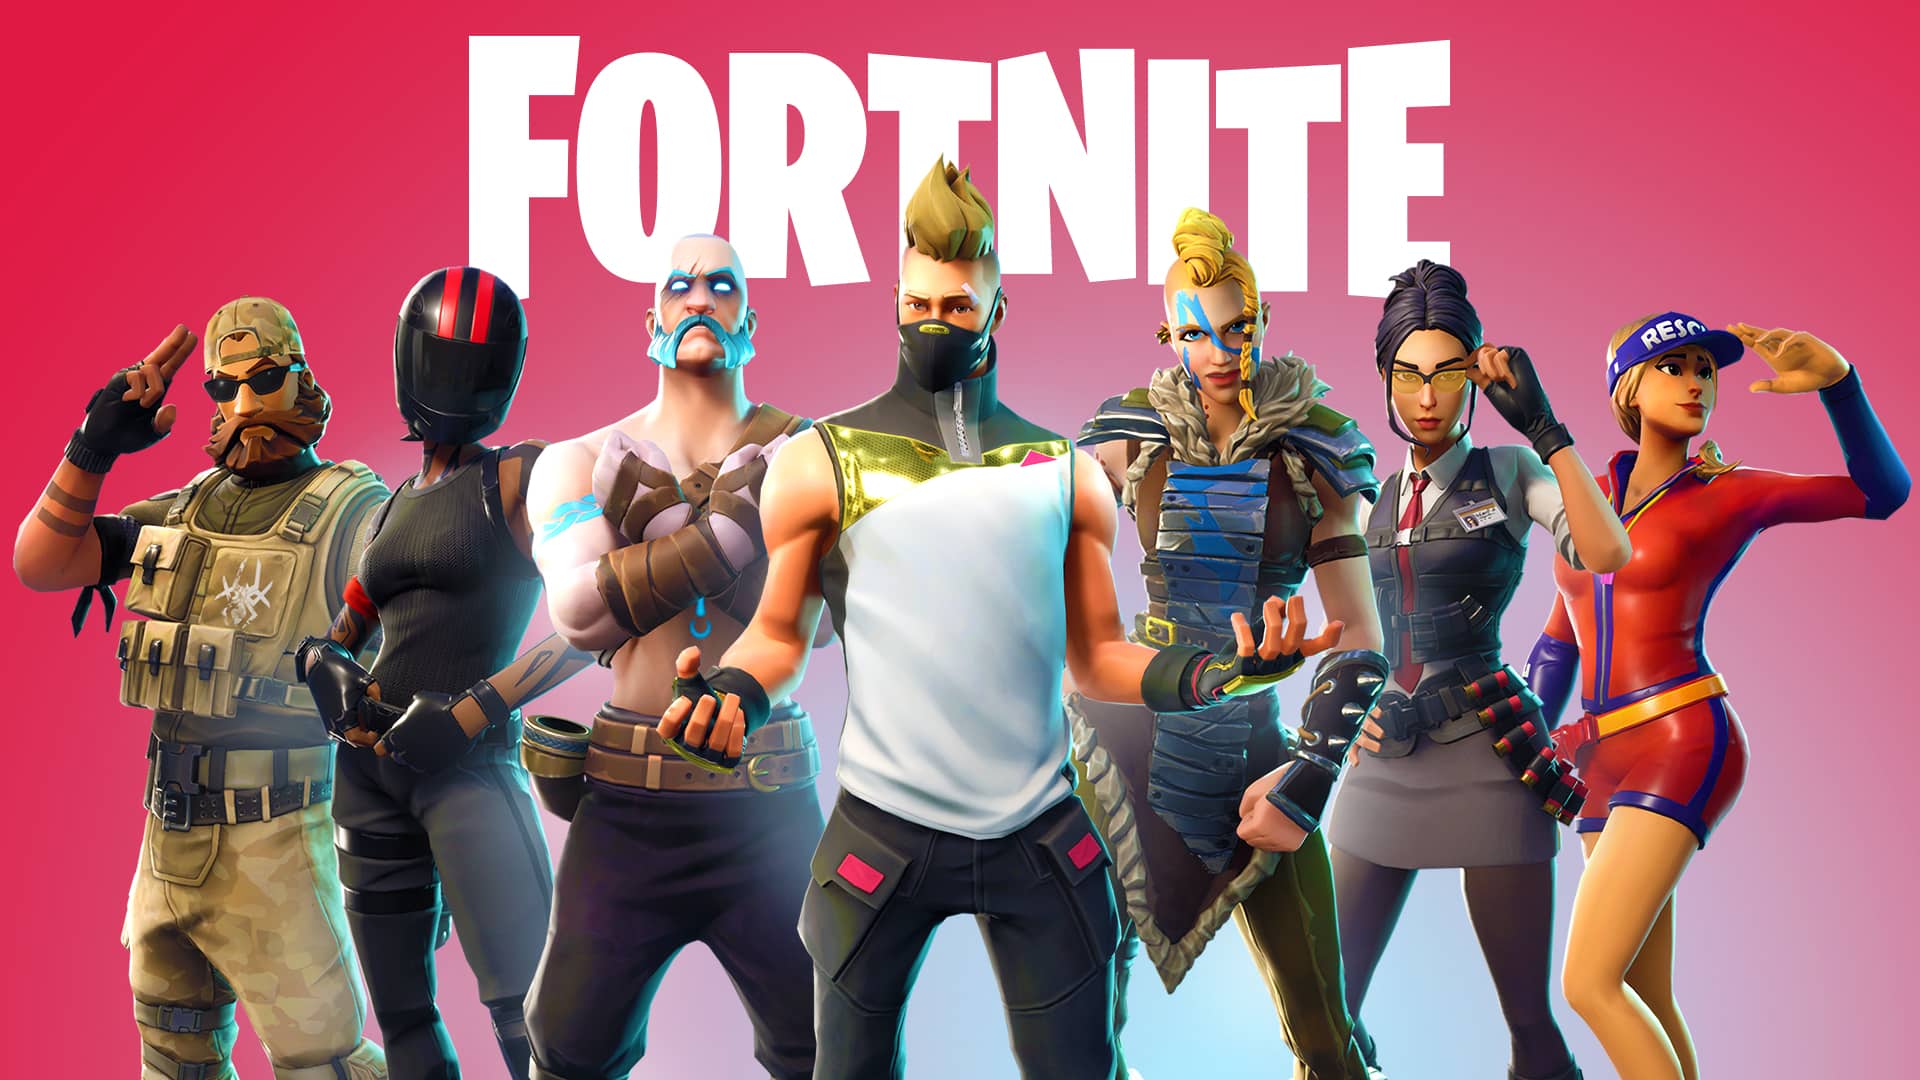 Fortnite doesn't return to the apple store anytime soon | 2a9ac4d8 fortnite | android, apple, epic games, fortnite, ios, multiplayer, pc | fortnite does not return to apple news